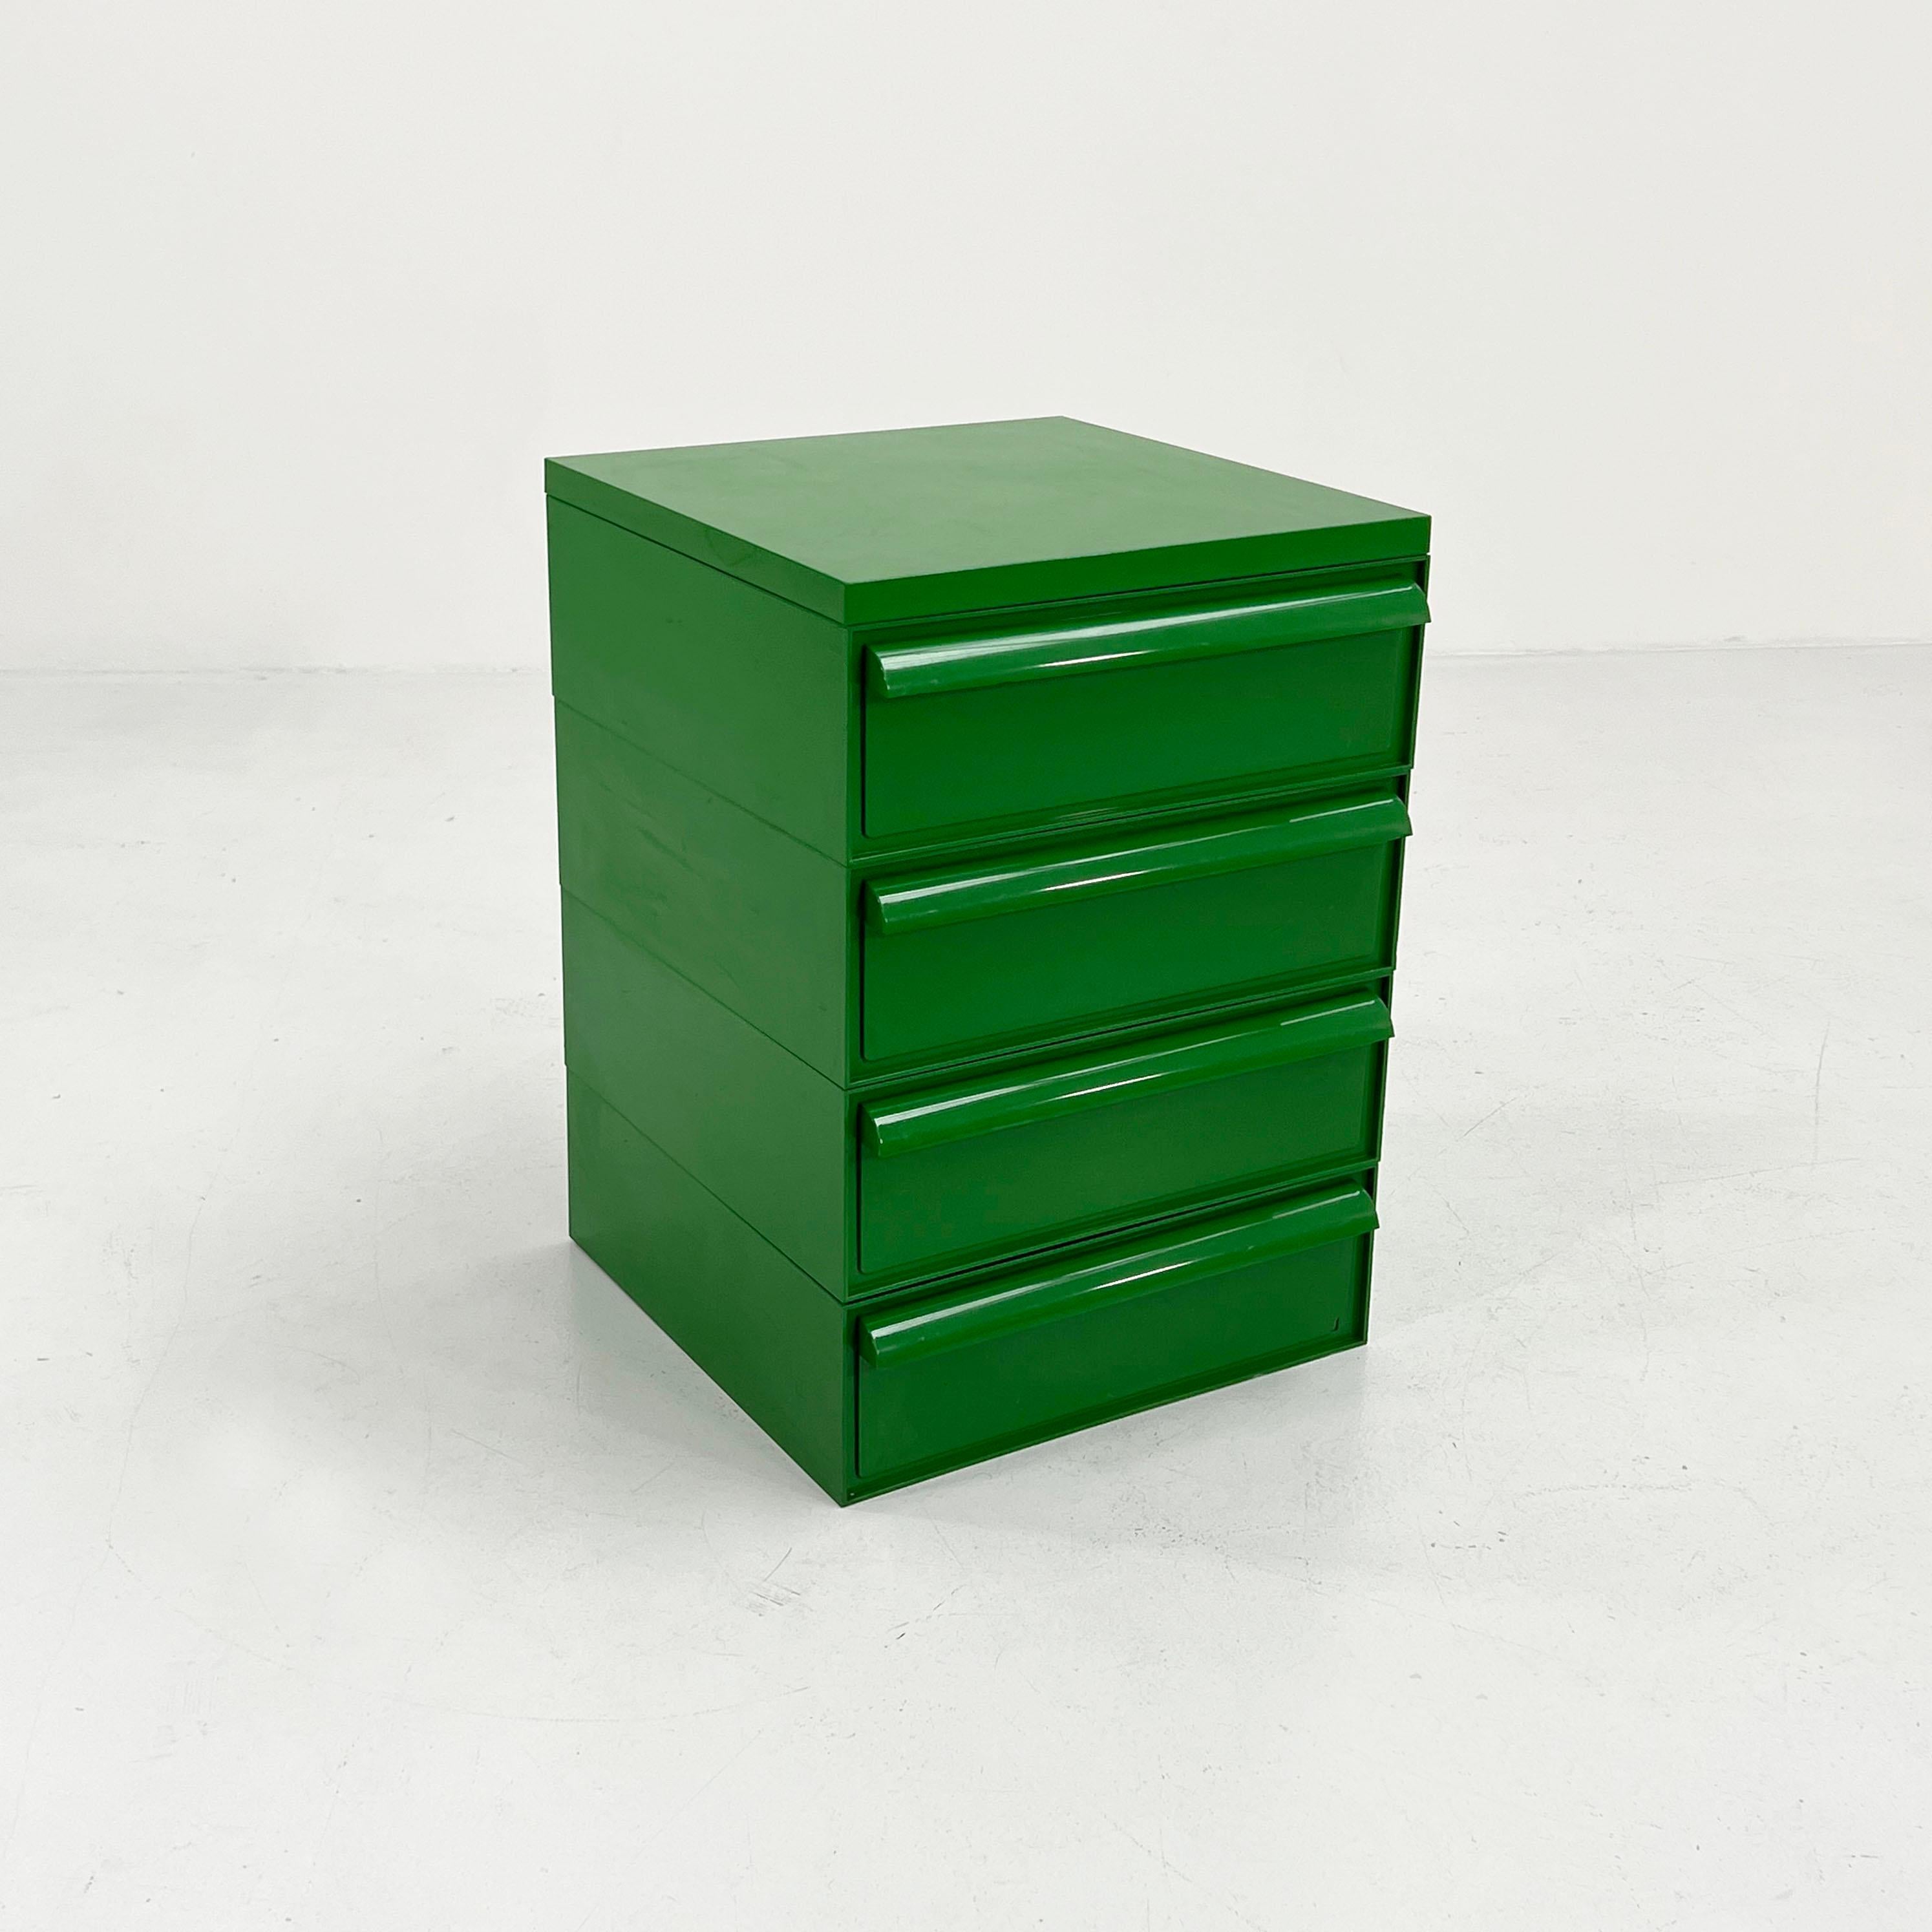 Designer - Simon Fussell
Producer - Kartell
Model - Model 4601
Design Period - Seventies
Measurements - Width 42 cm x Depth 46 cm x Height 60 cm
Materials - Plastic
Color - Green
Light wear consistent with age and use. Some light scuffs. One